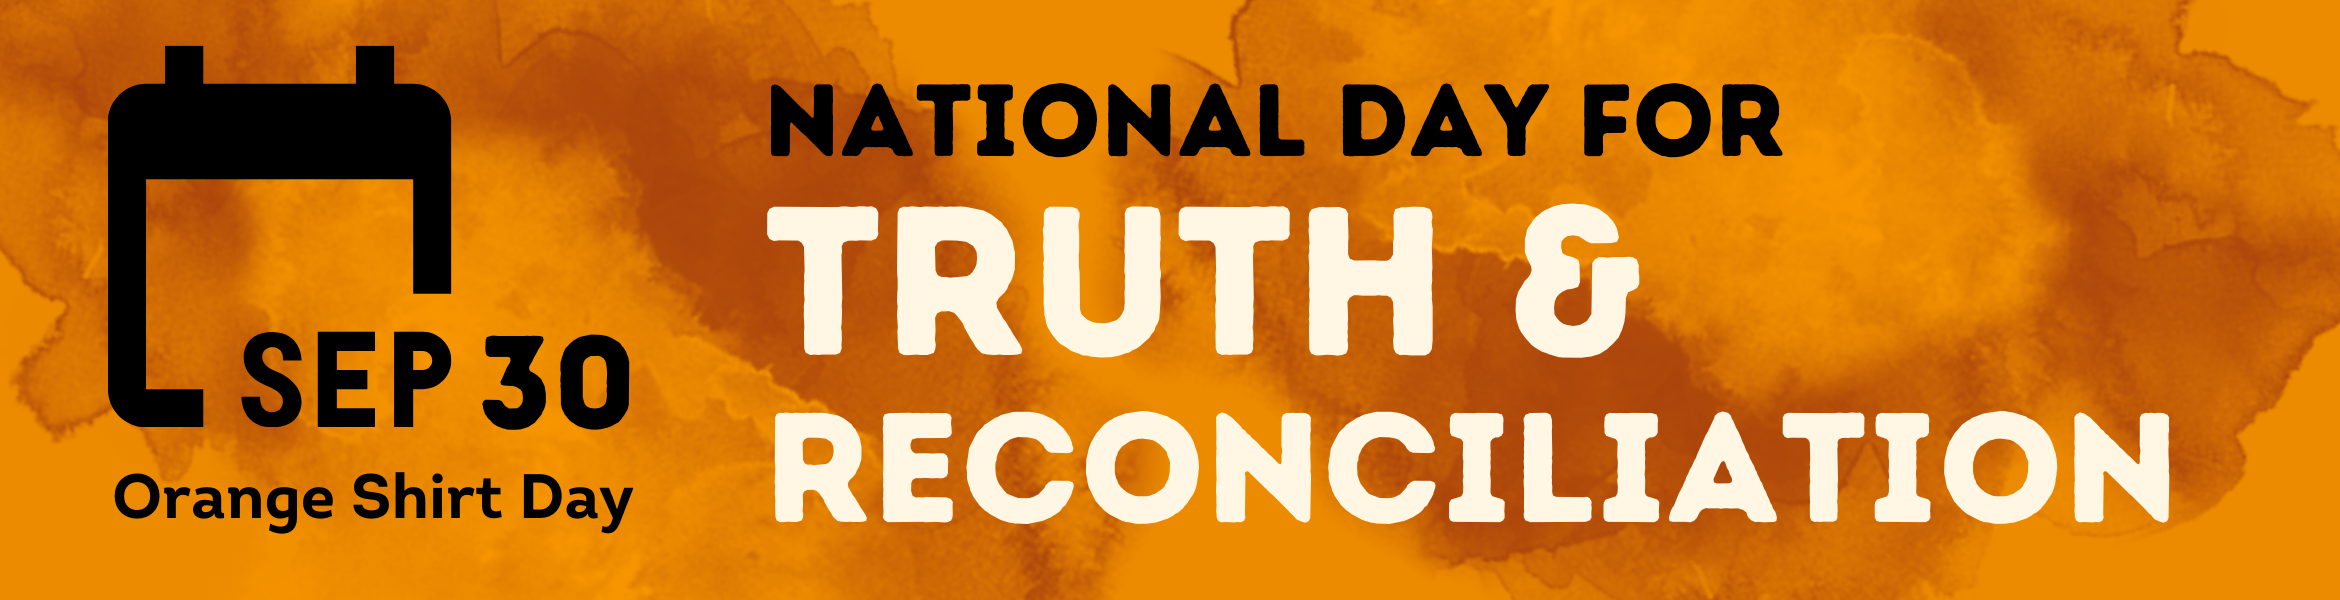 Sep 30: National Day for Truth & Reconciliation